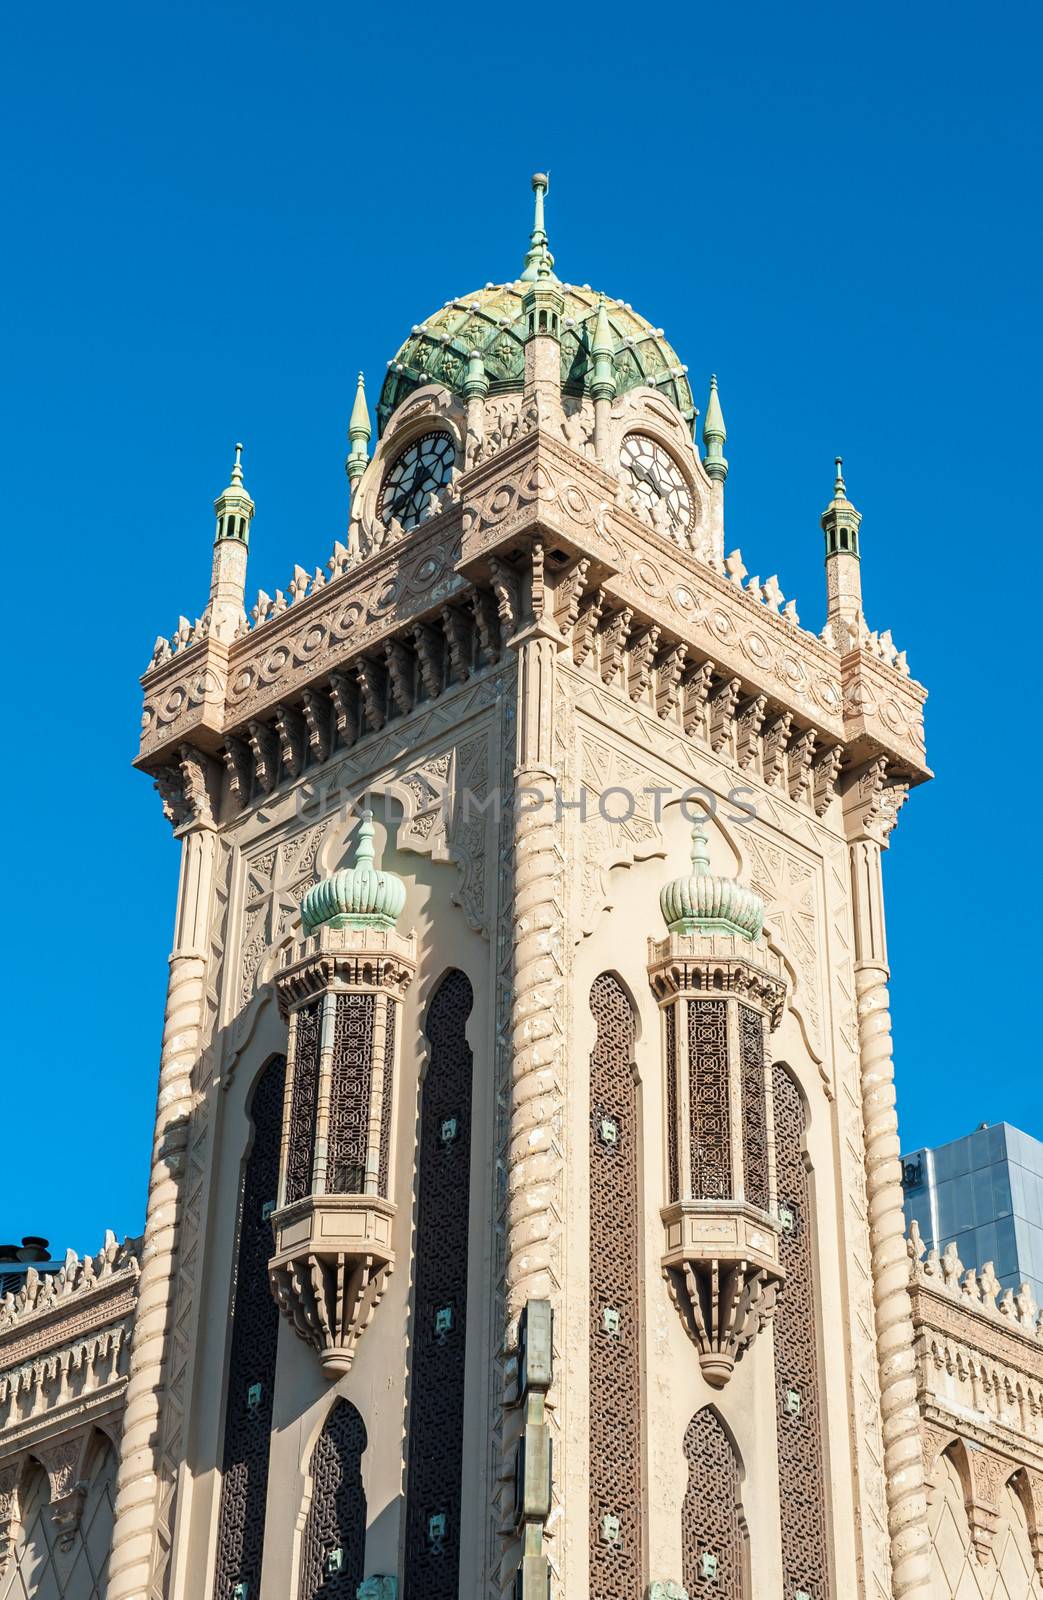 Forum Theatre is a famous landmark of Melbourne with Moorish Revival style exterior. It can be found on the corner of Flinders Street and Russell Street. Melbourne, Victoria - Australia